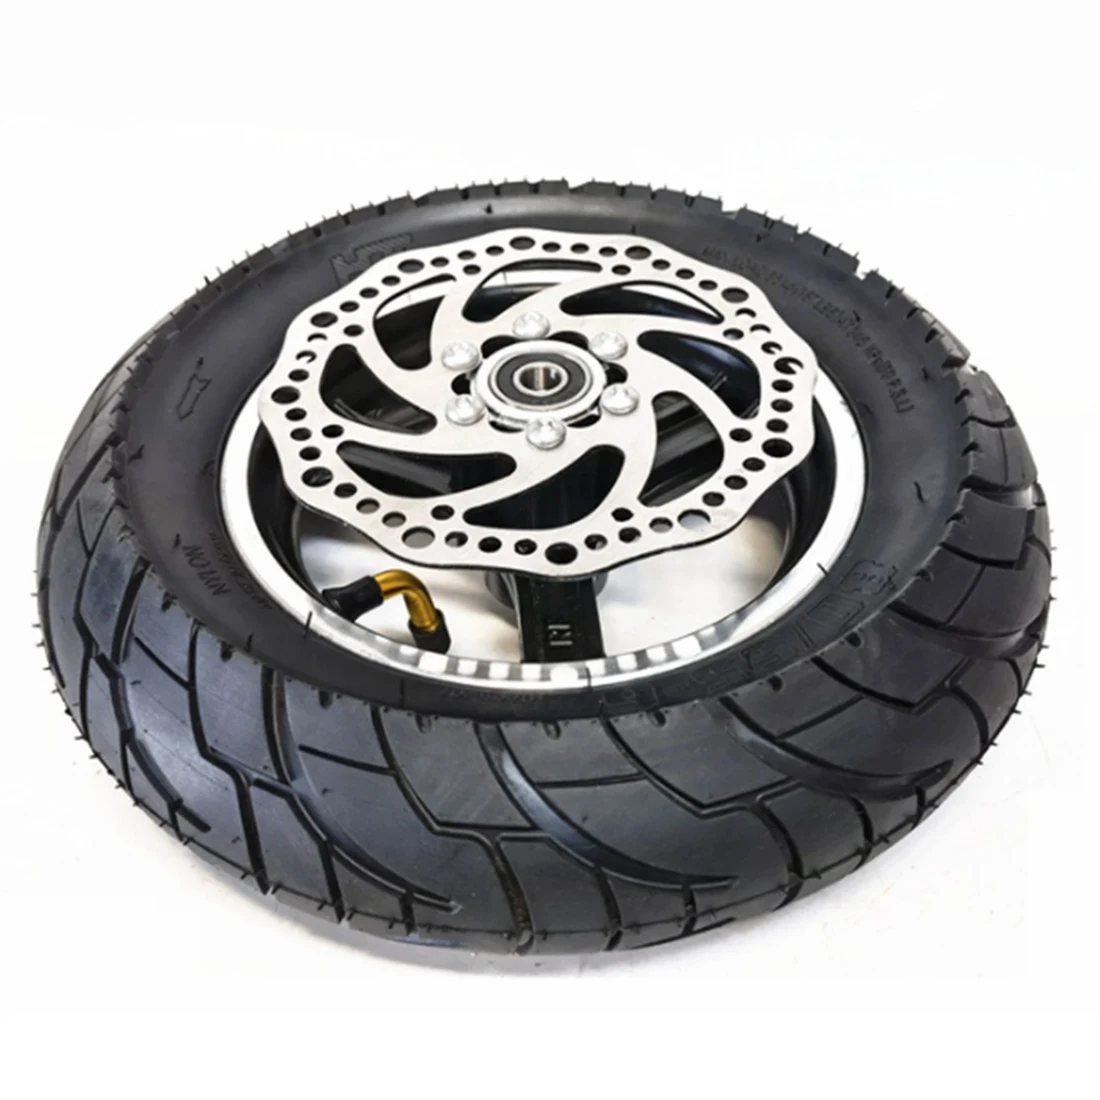 

10 Inches Scooter Tire Tubeless Tire Full Wheel with Hub Universal for 10X3.0 255X80 Scooter Tires,Road Tire